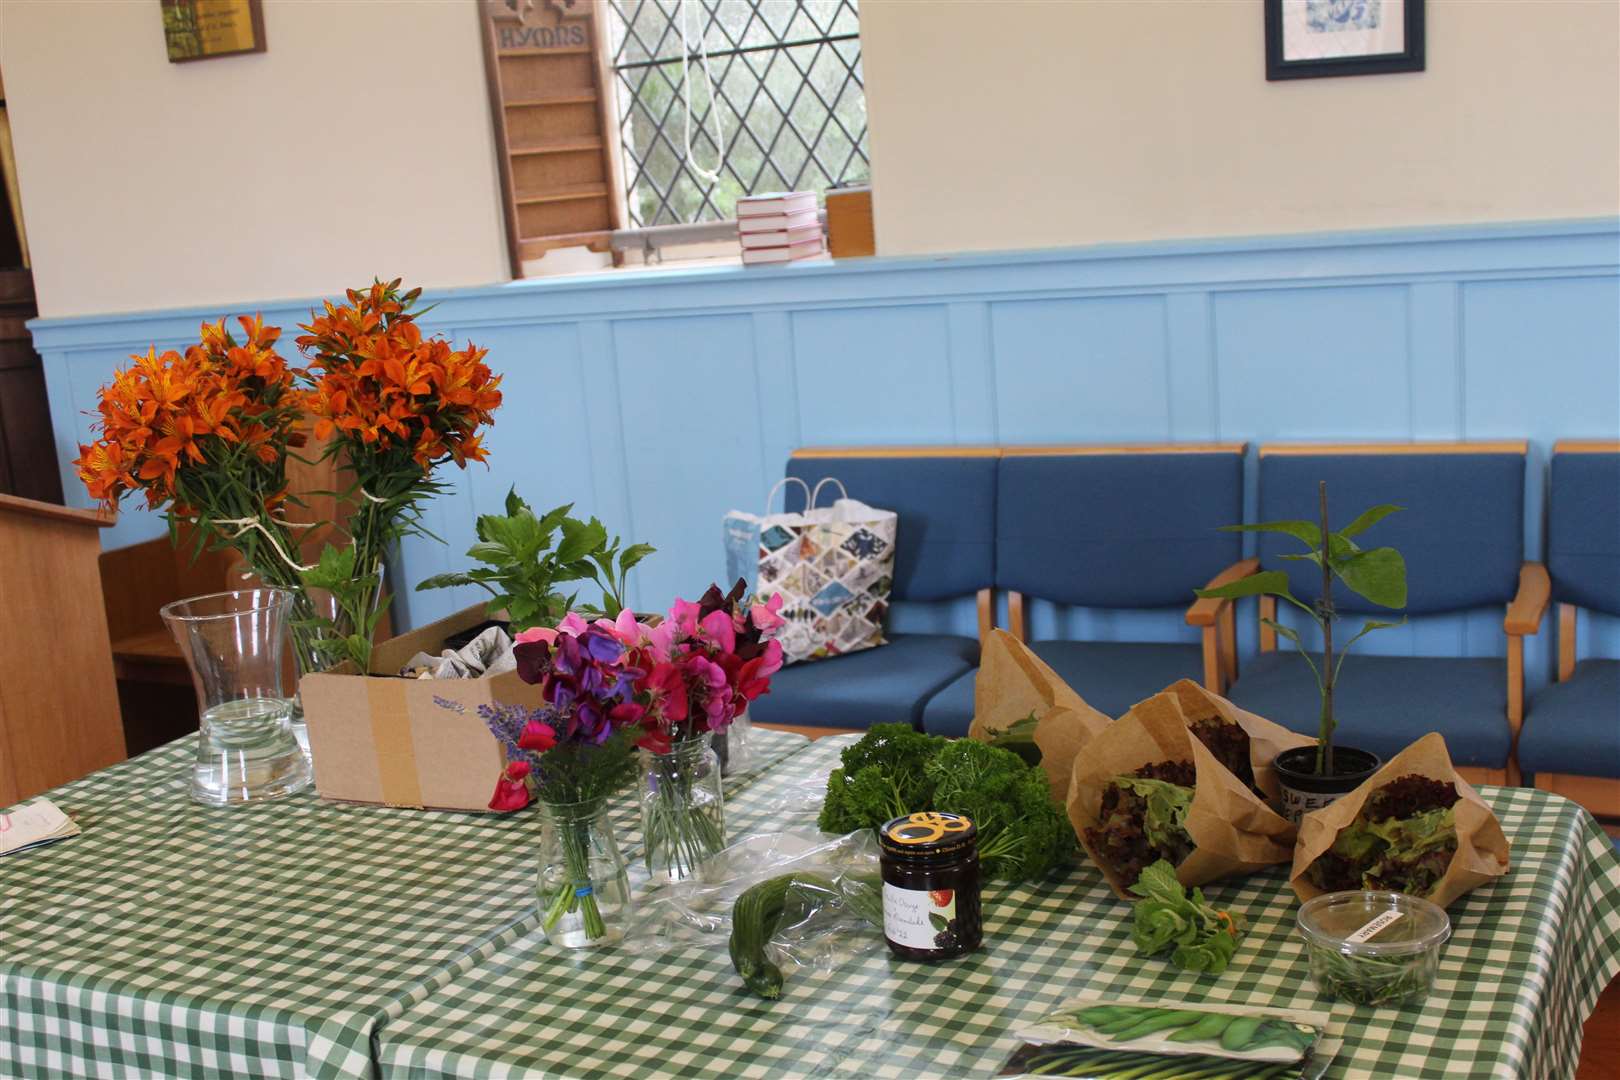 Some of the local produce available at Kemnay's St Anne's church on Green Monday. Picture: Griselda McGregor